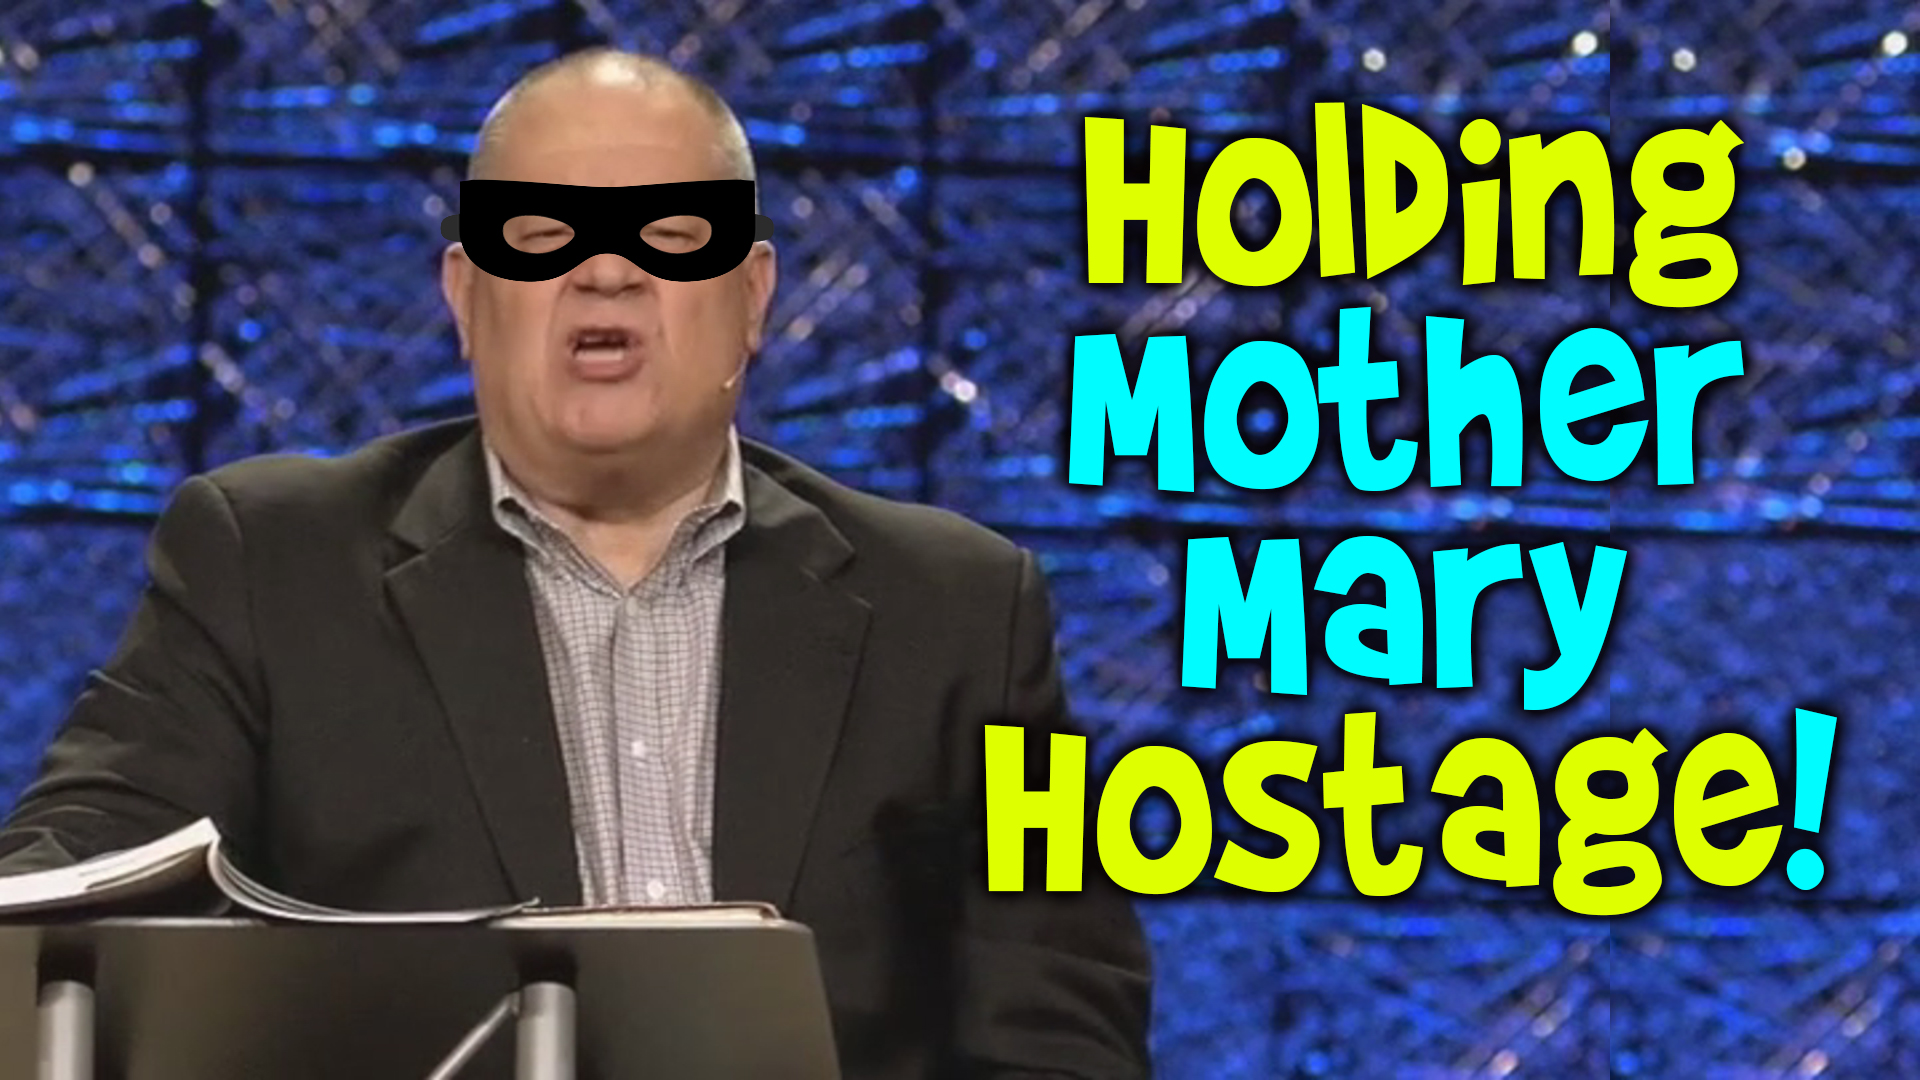 Friday Funny: Holding Mother Mary Hostage